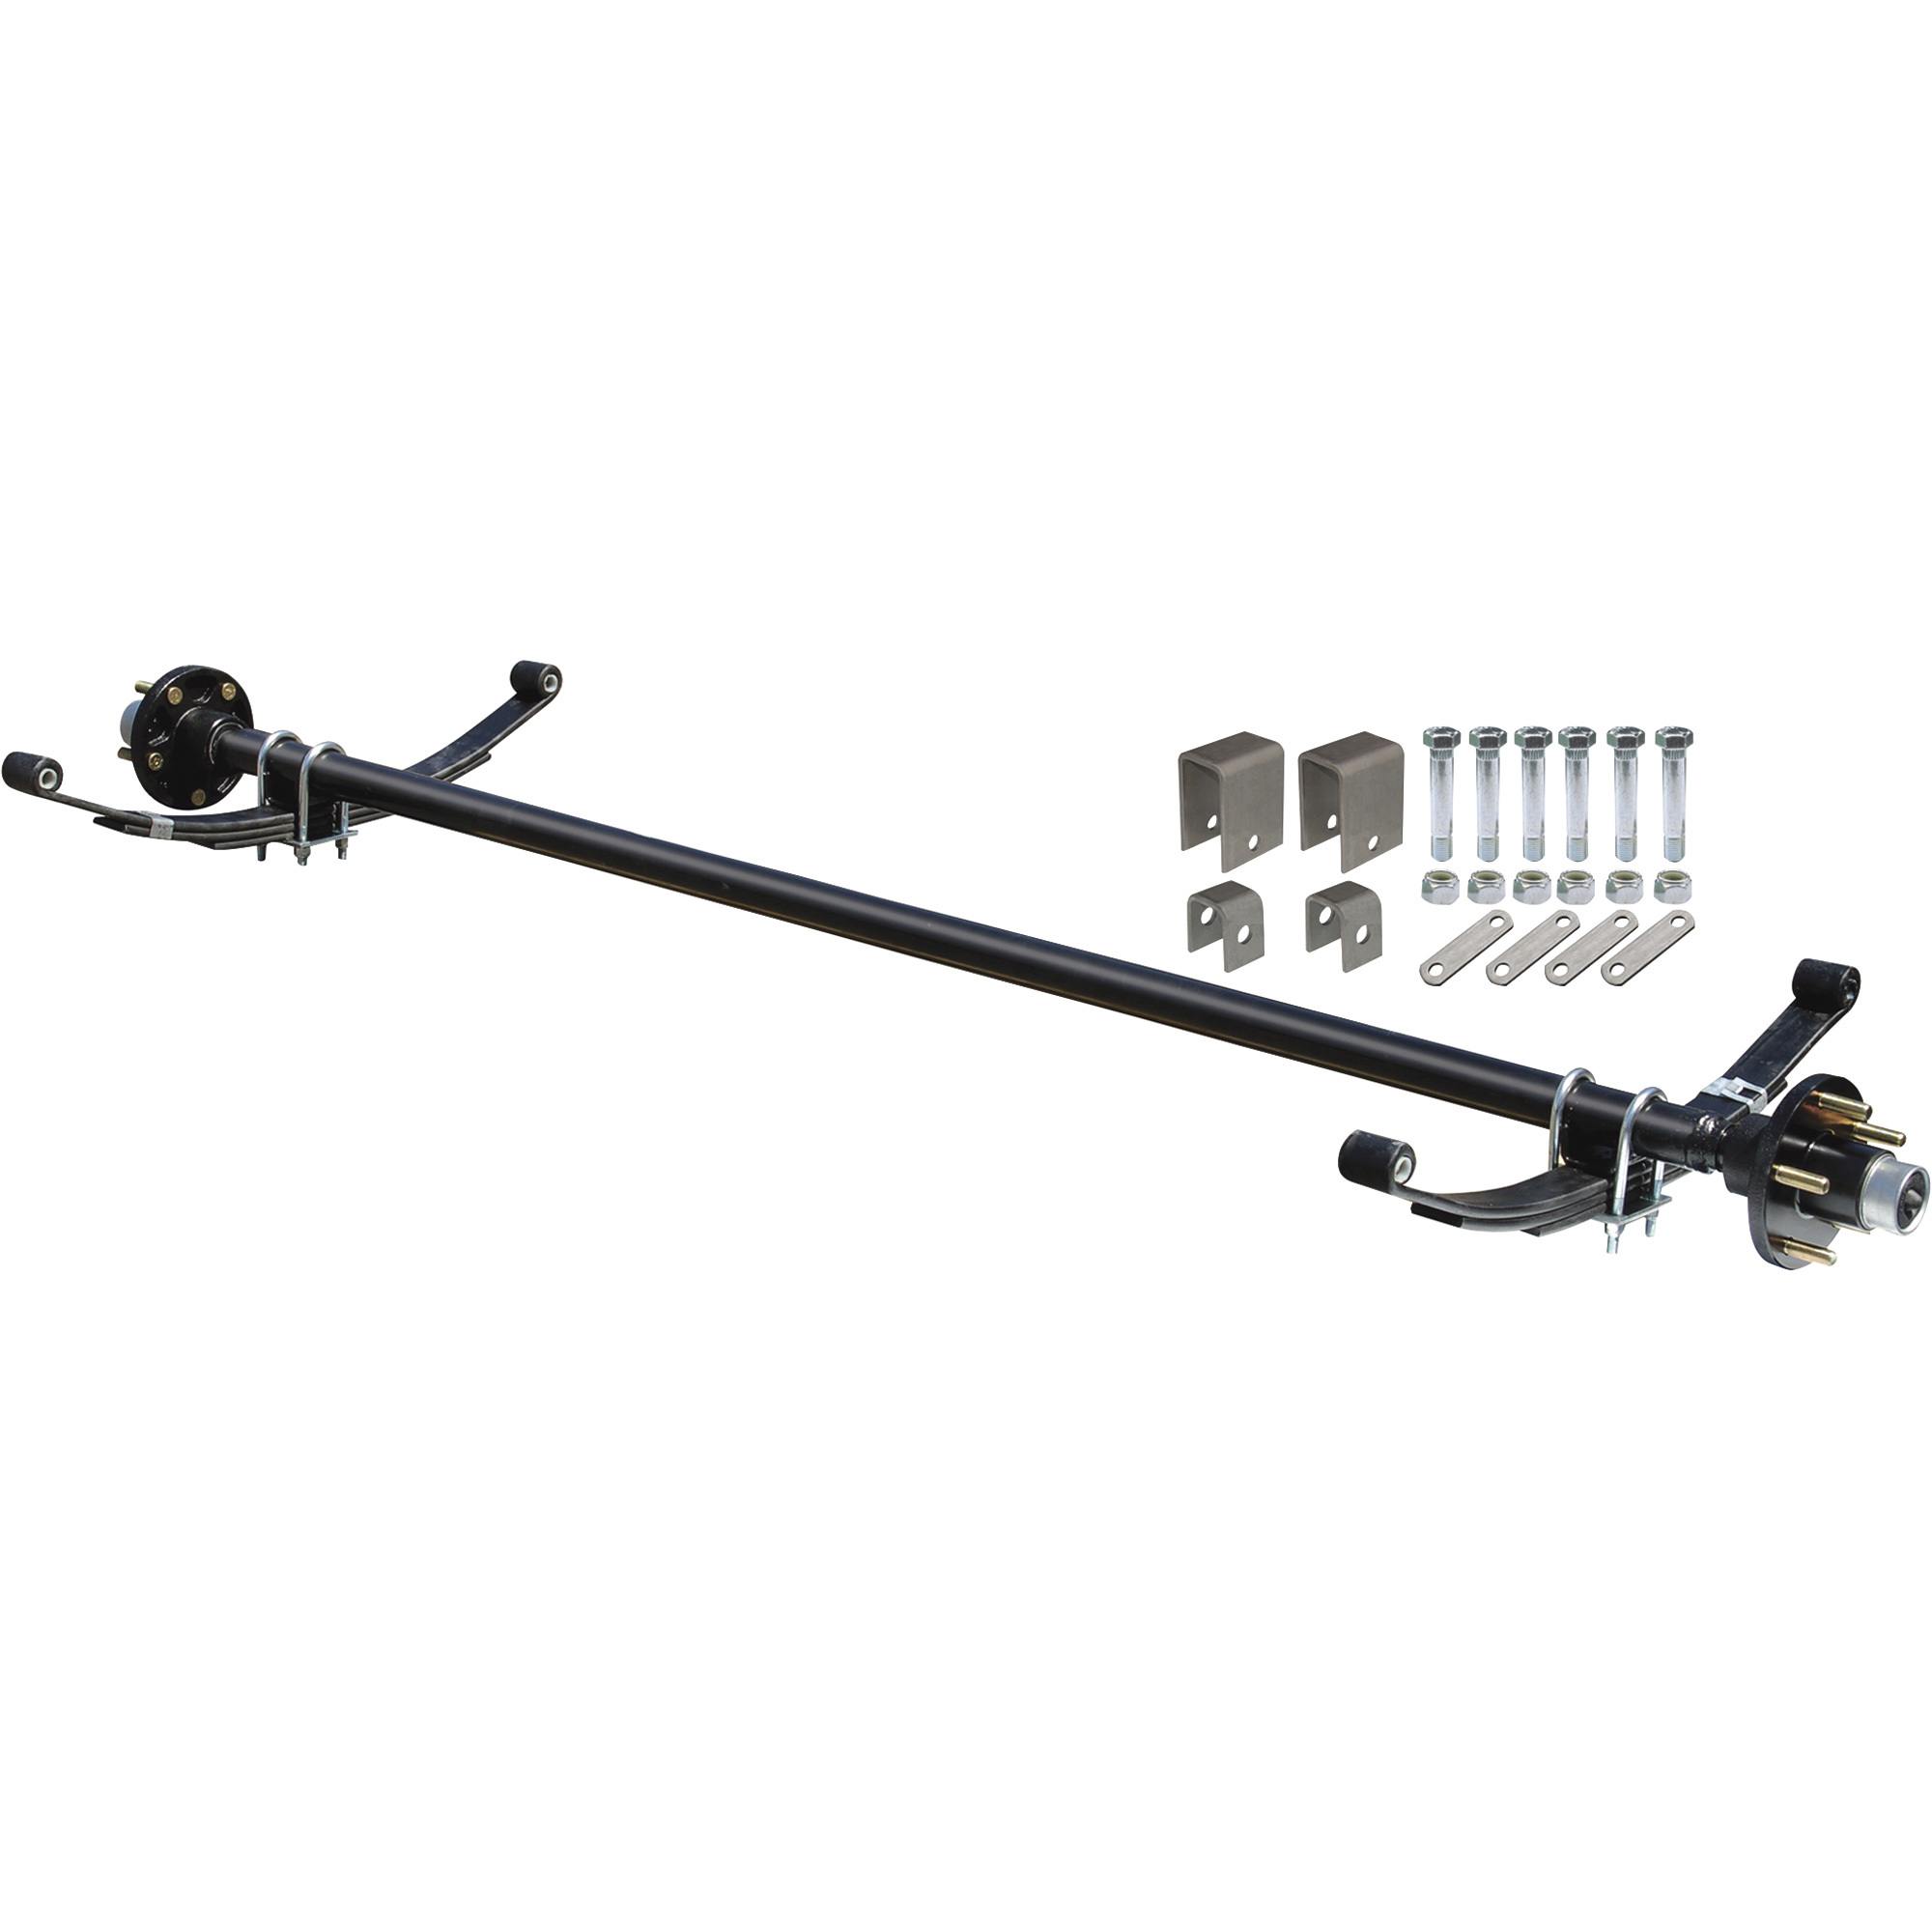 Ultra-Tow 2000-Lb. Capacity Complete Axle Kit â 60Inch Hubface, 48Inch Spring Center, 5-Stud Pattern, 4.5Inch Hubs